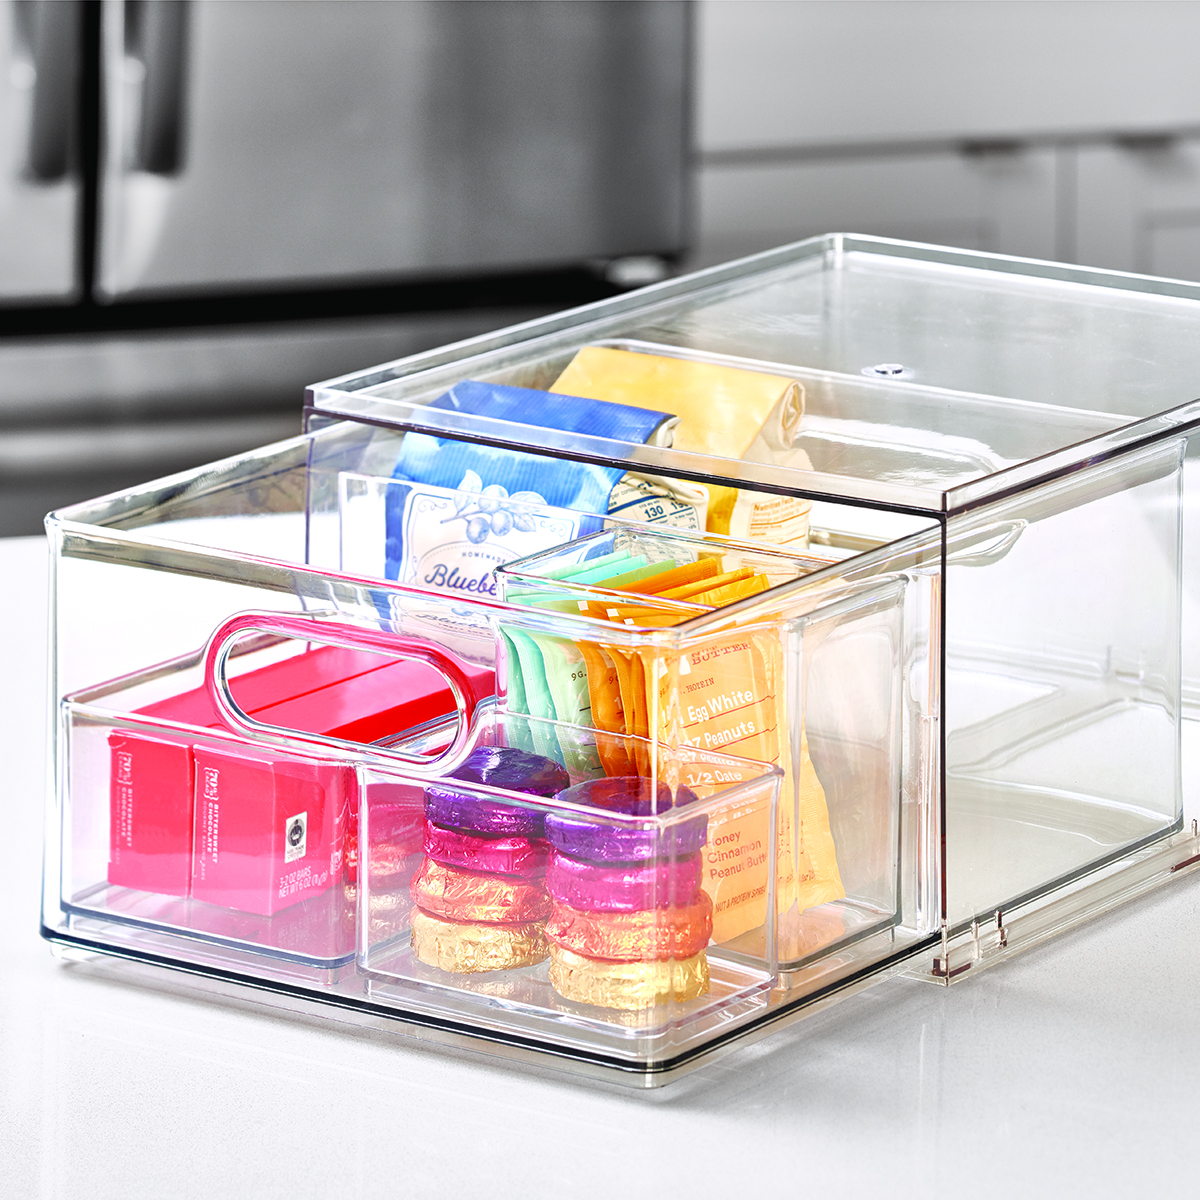 https://www.containerstore.com/catalogimages/390166/10077088-T.H.E.-large-drawer-VEN3.jpg?width=128&height=128&align=center